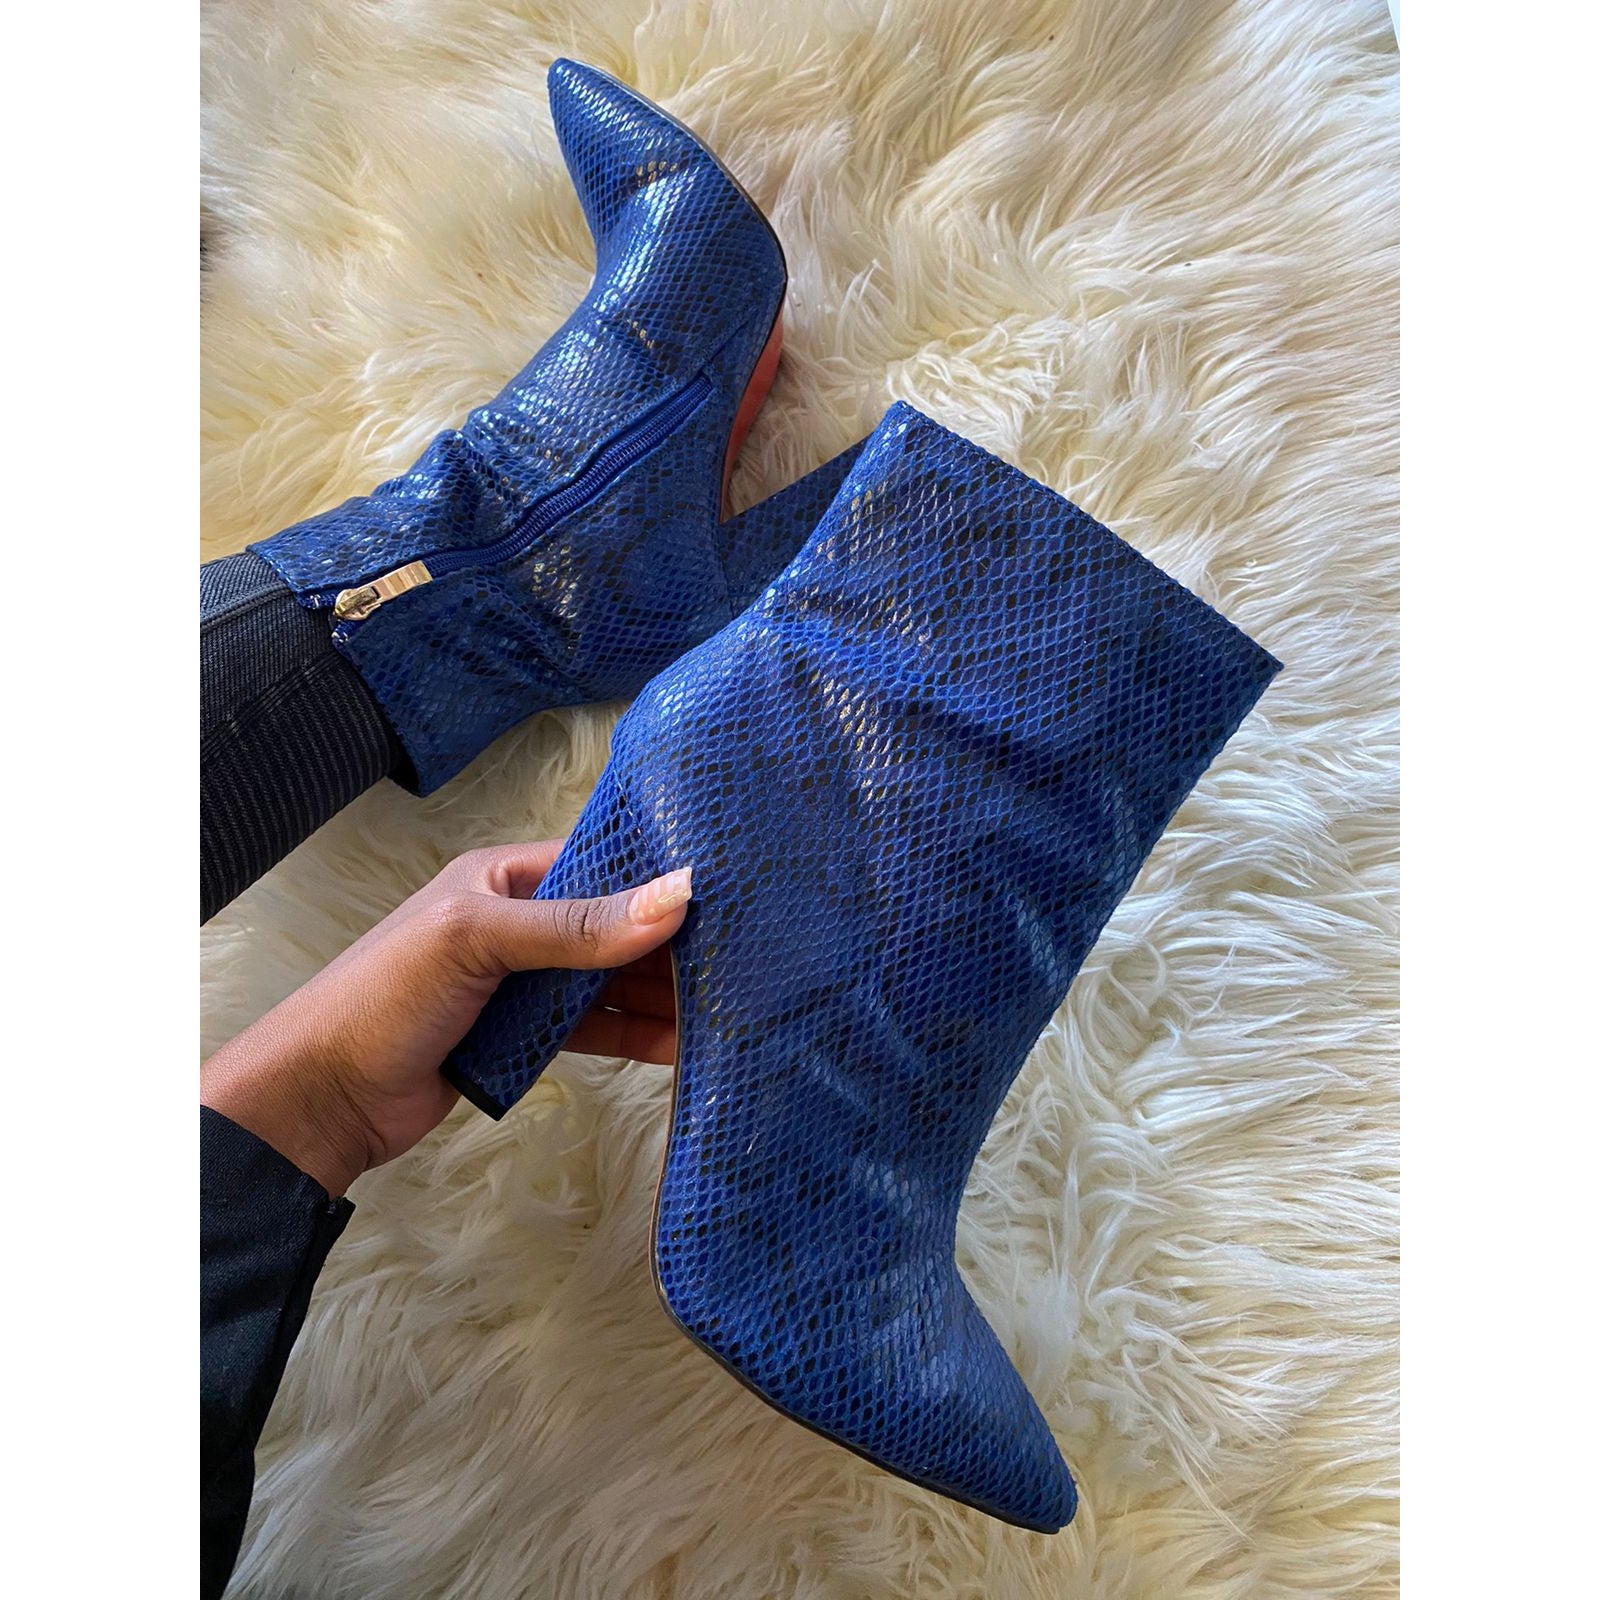 Boots - Snake Print Ankel Boots for sale in Pretoria / Tshwane (ID ...